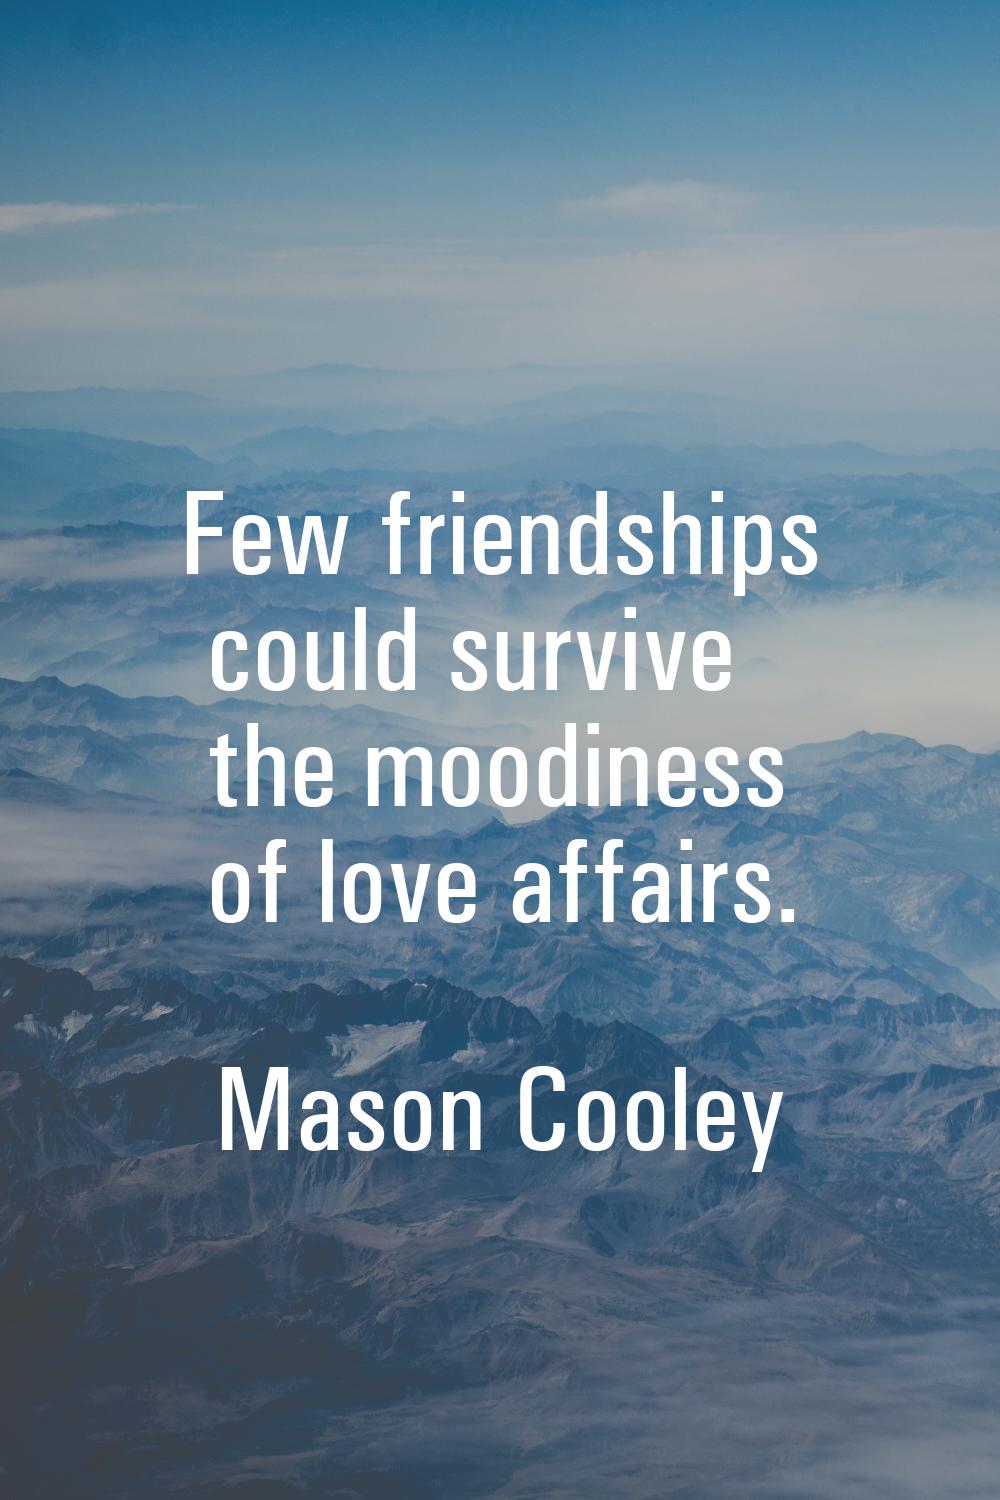 Few friendships could survive the moodiness of love affairs.